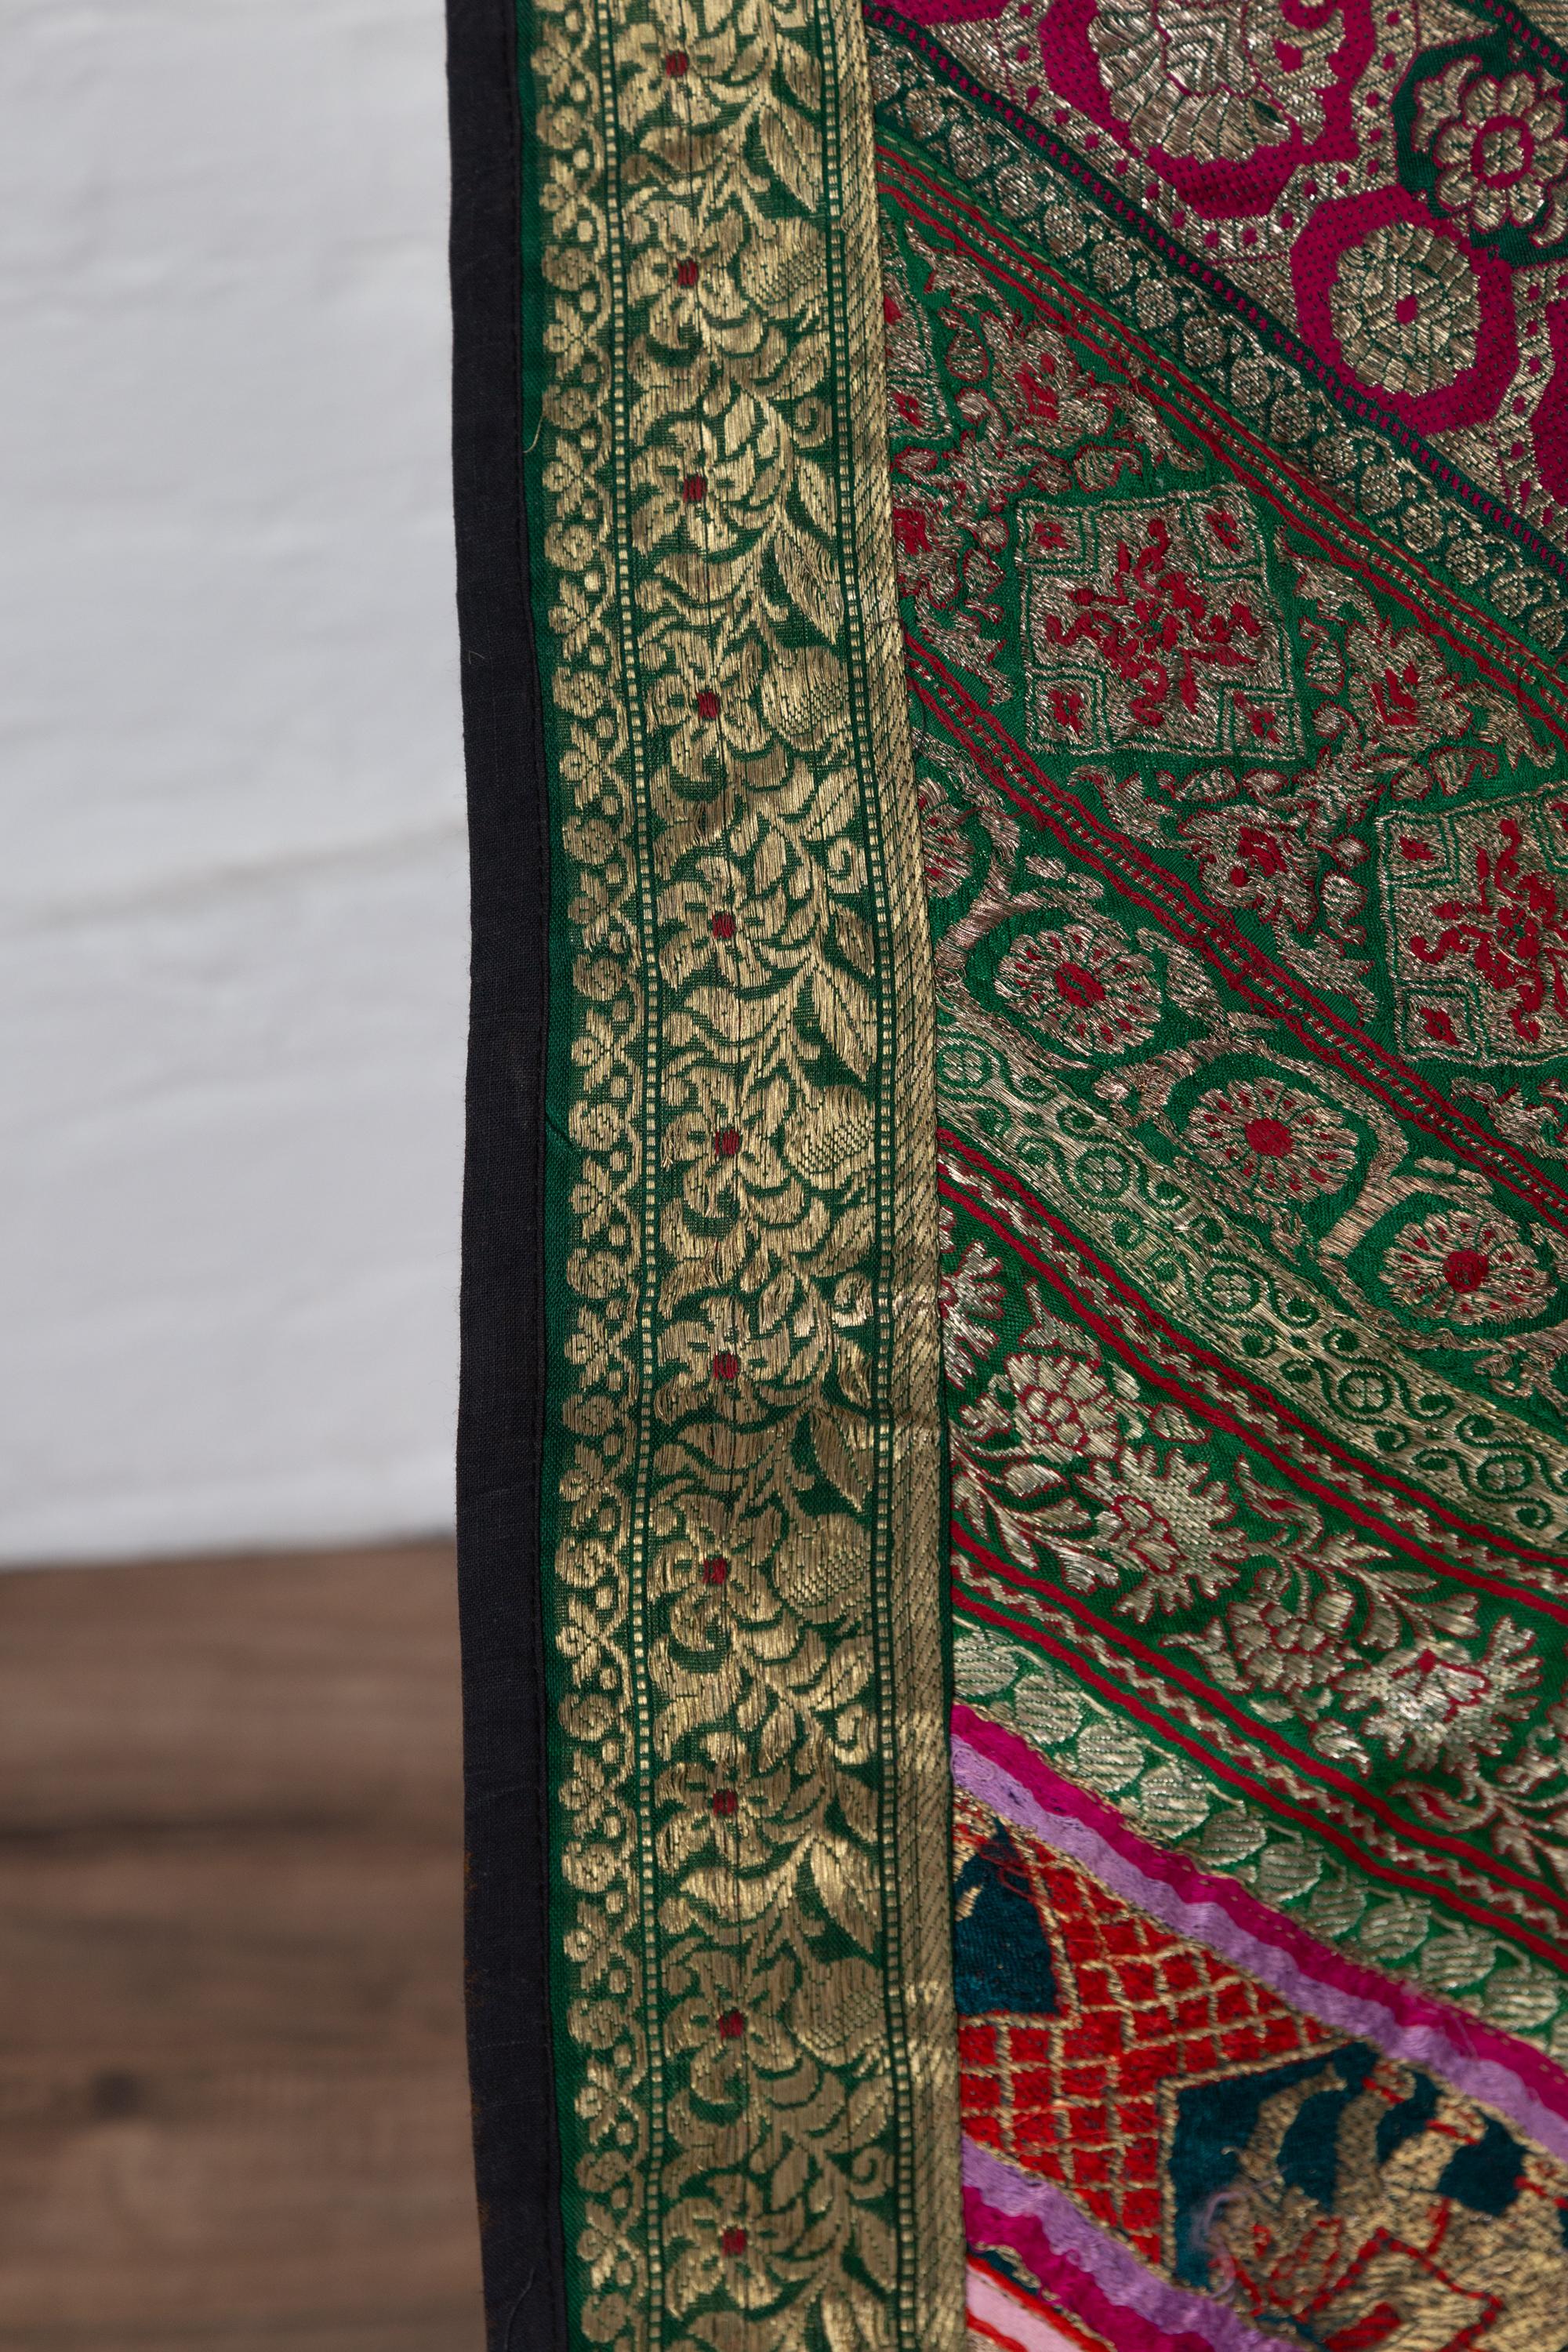 Vintage Indian Silk Embroidered Fabric with Green, Red, Fuchsia and Golden Tones 4